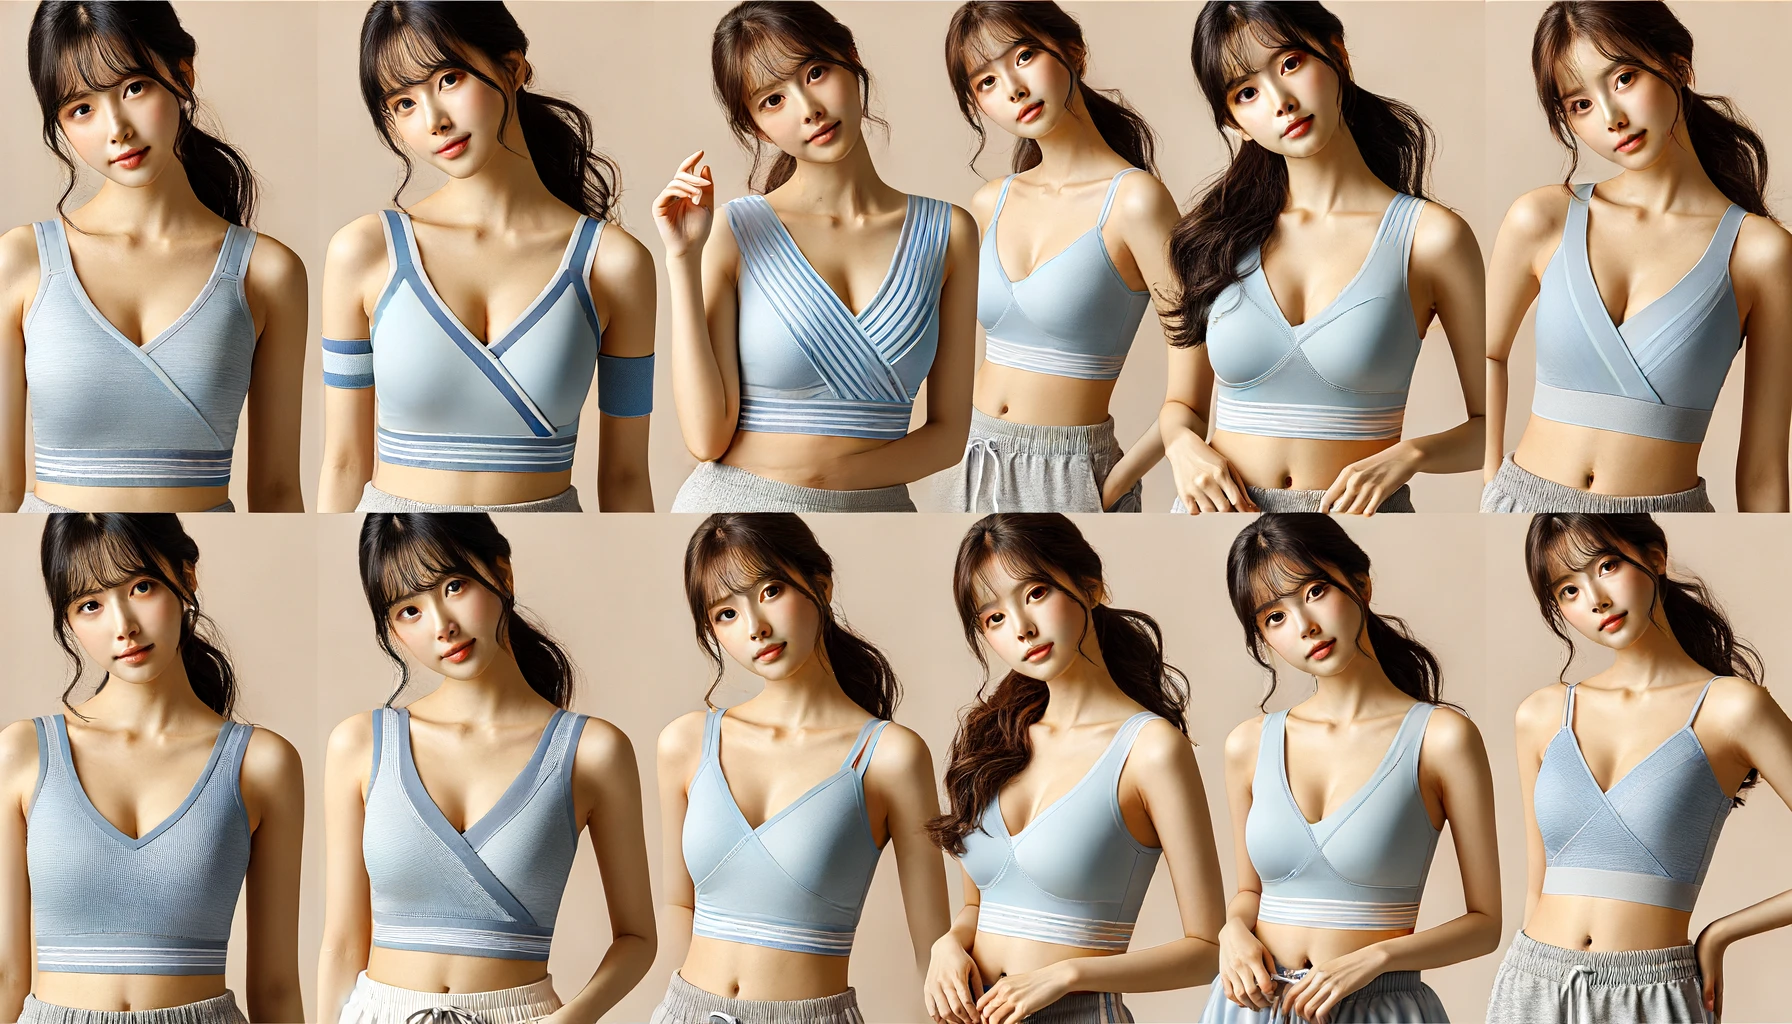 Multiple stylish sports bras suitable for light exercise, similar to the one in the image, in light blue color, without any logos or text, displayed on a plain background. Include Japanese models wearing the sports bras in a light exercise setting.